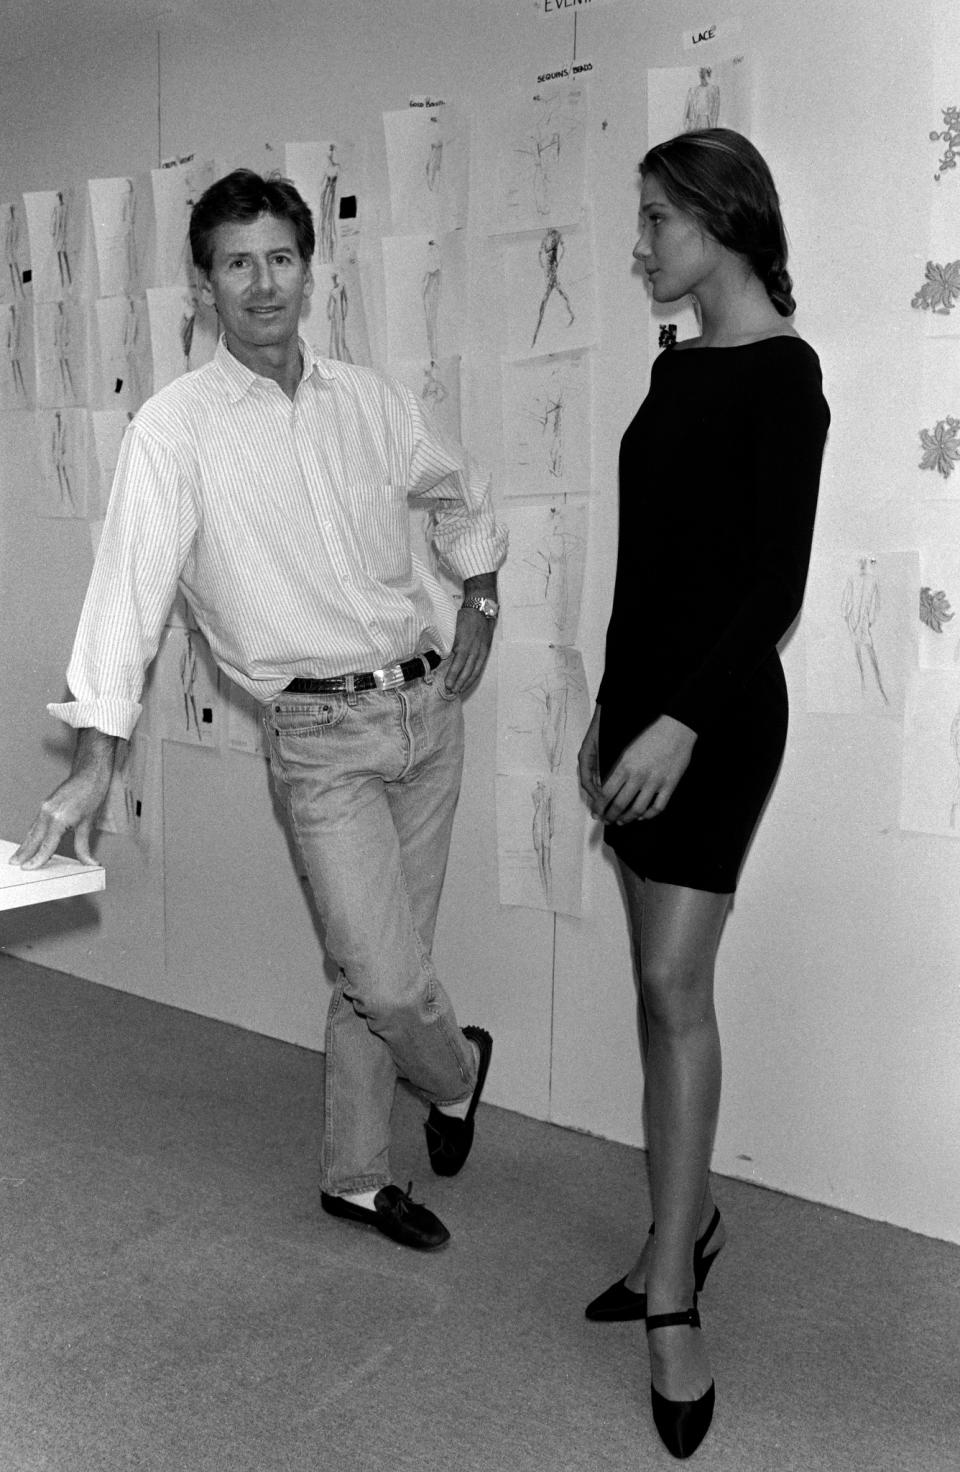 designer Calvin Klein, and Carla Bruni pose for pictures during a preview of Seventh Avenue designers.